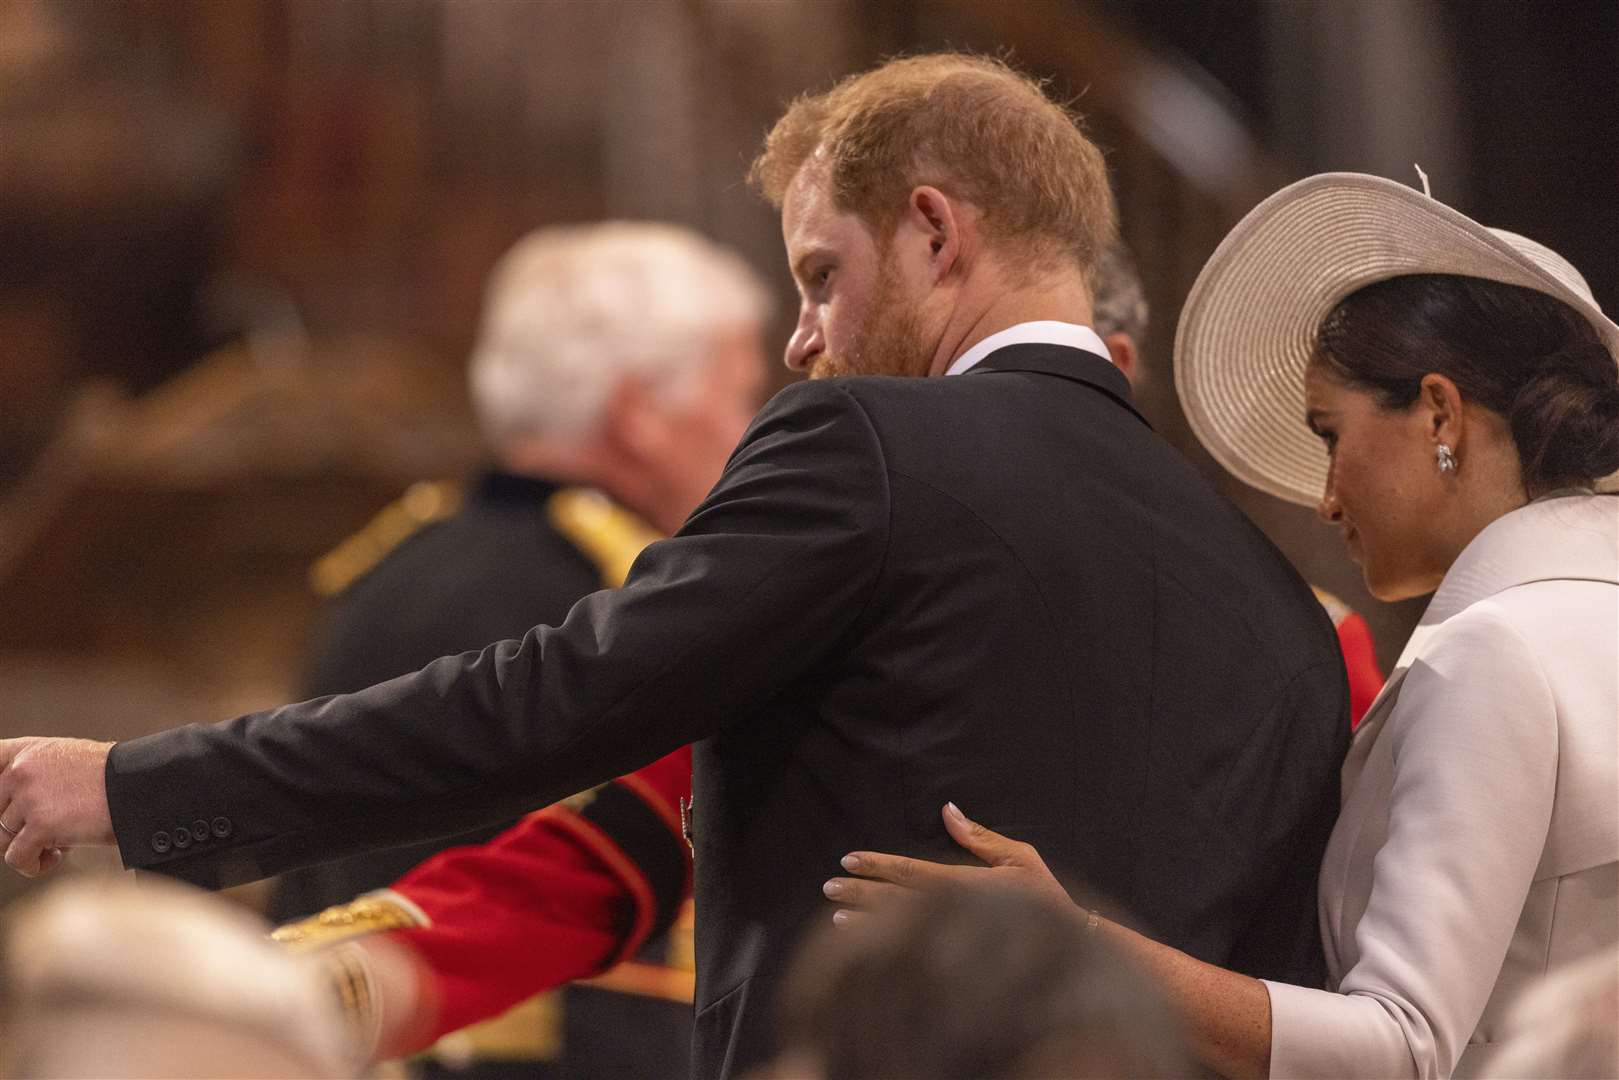 Meghan with her hand on Harry’s back (Ian Vogler/Daily Mirror/PA)